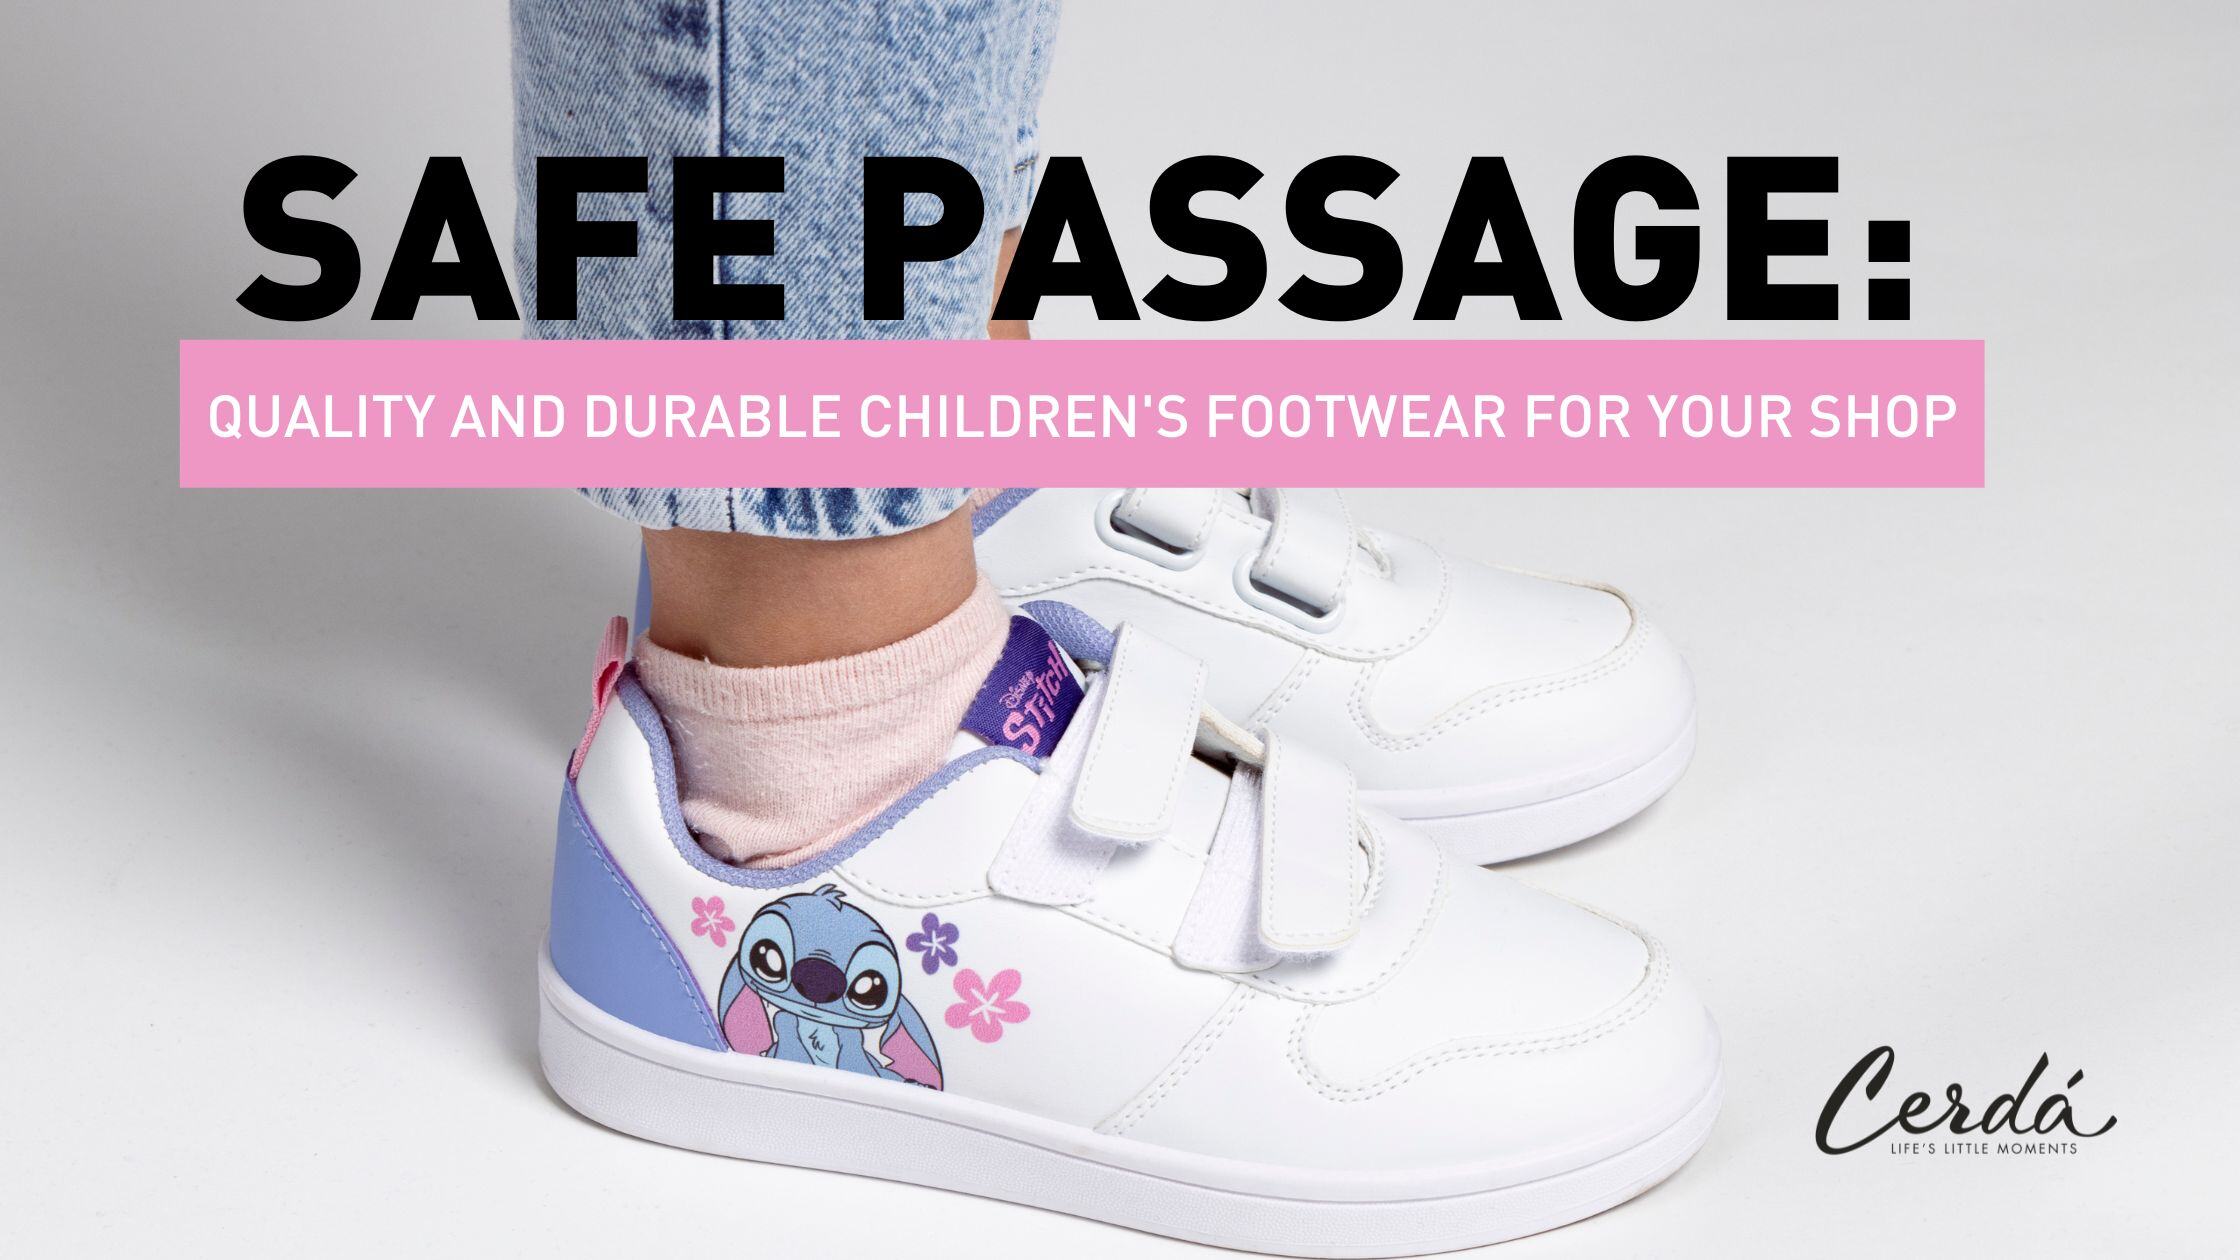 Safe Steps: Quality and durable children's footwear for your shop